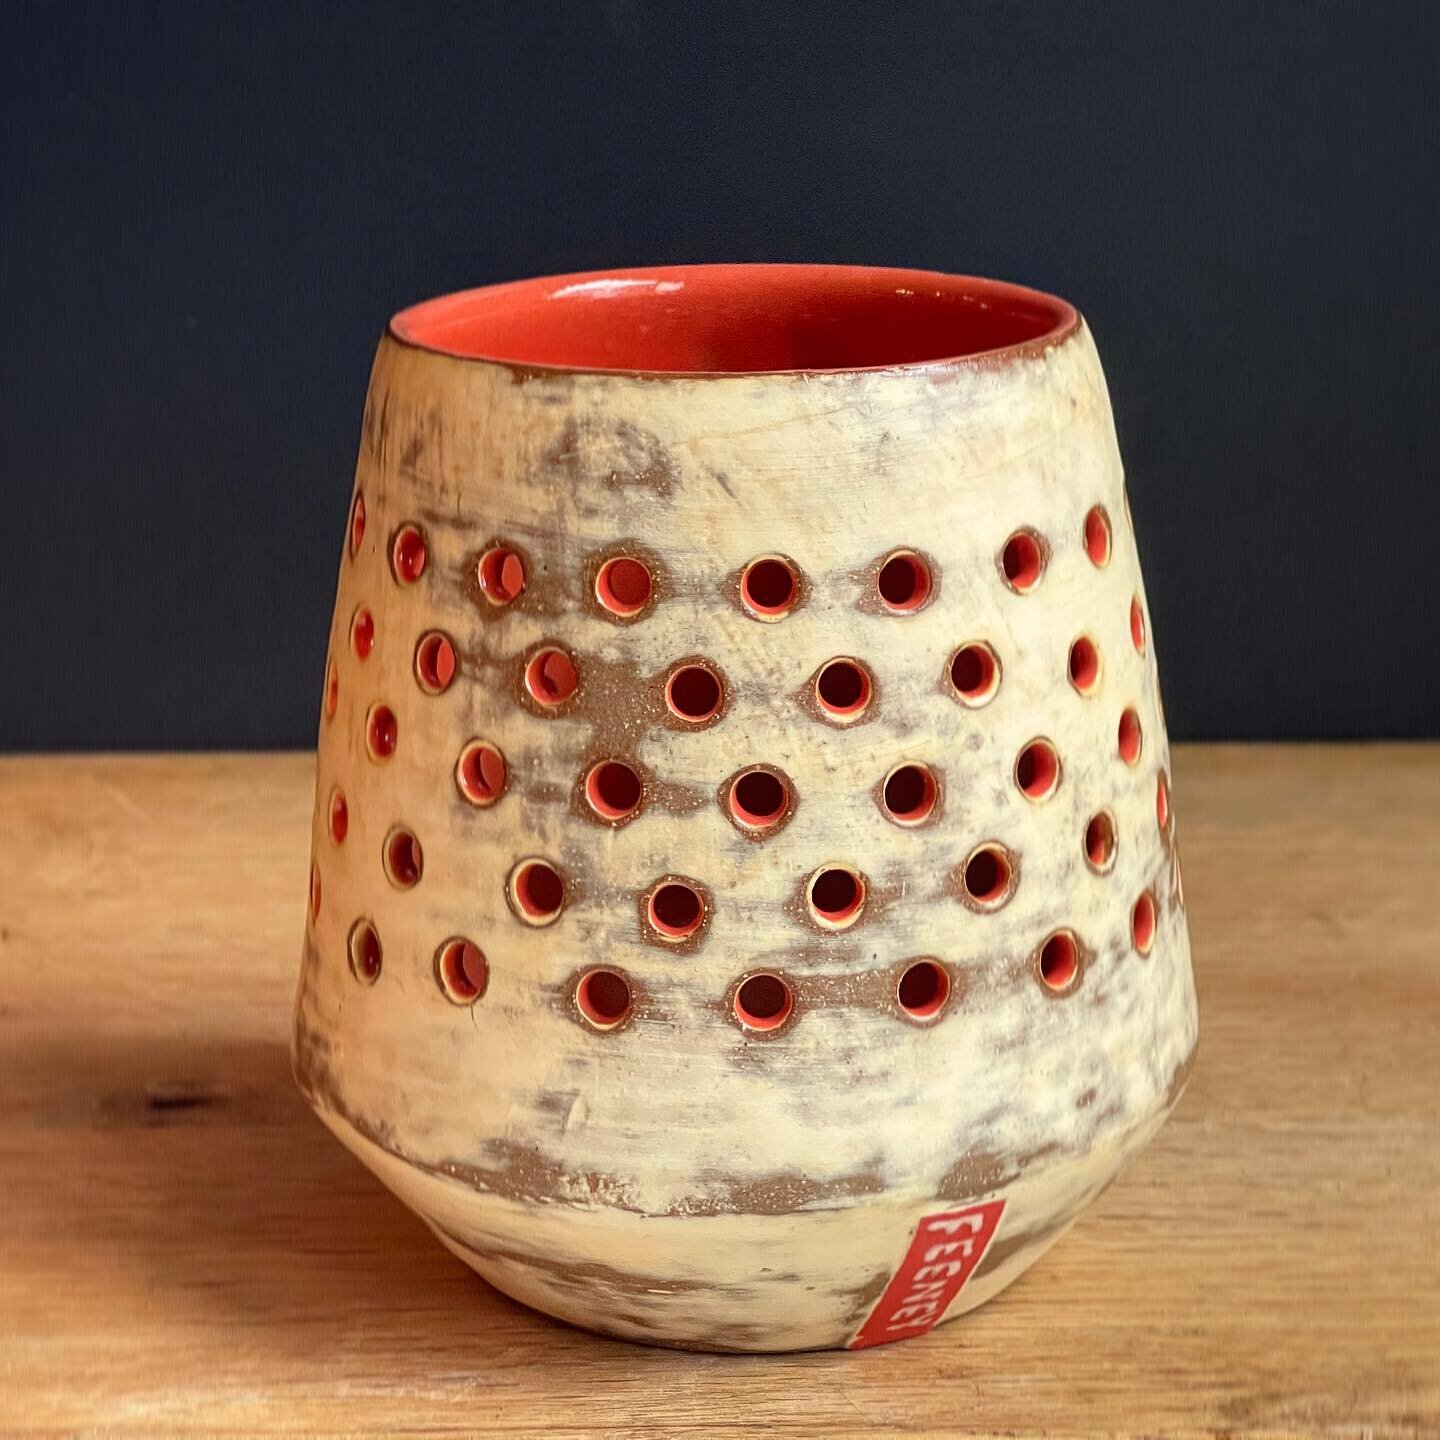 Candle holder. Photo of glowing red dots while in use to come. 🔥
.
.
.
#functionalceramics #terrasigillata #candleholder #grapicclay